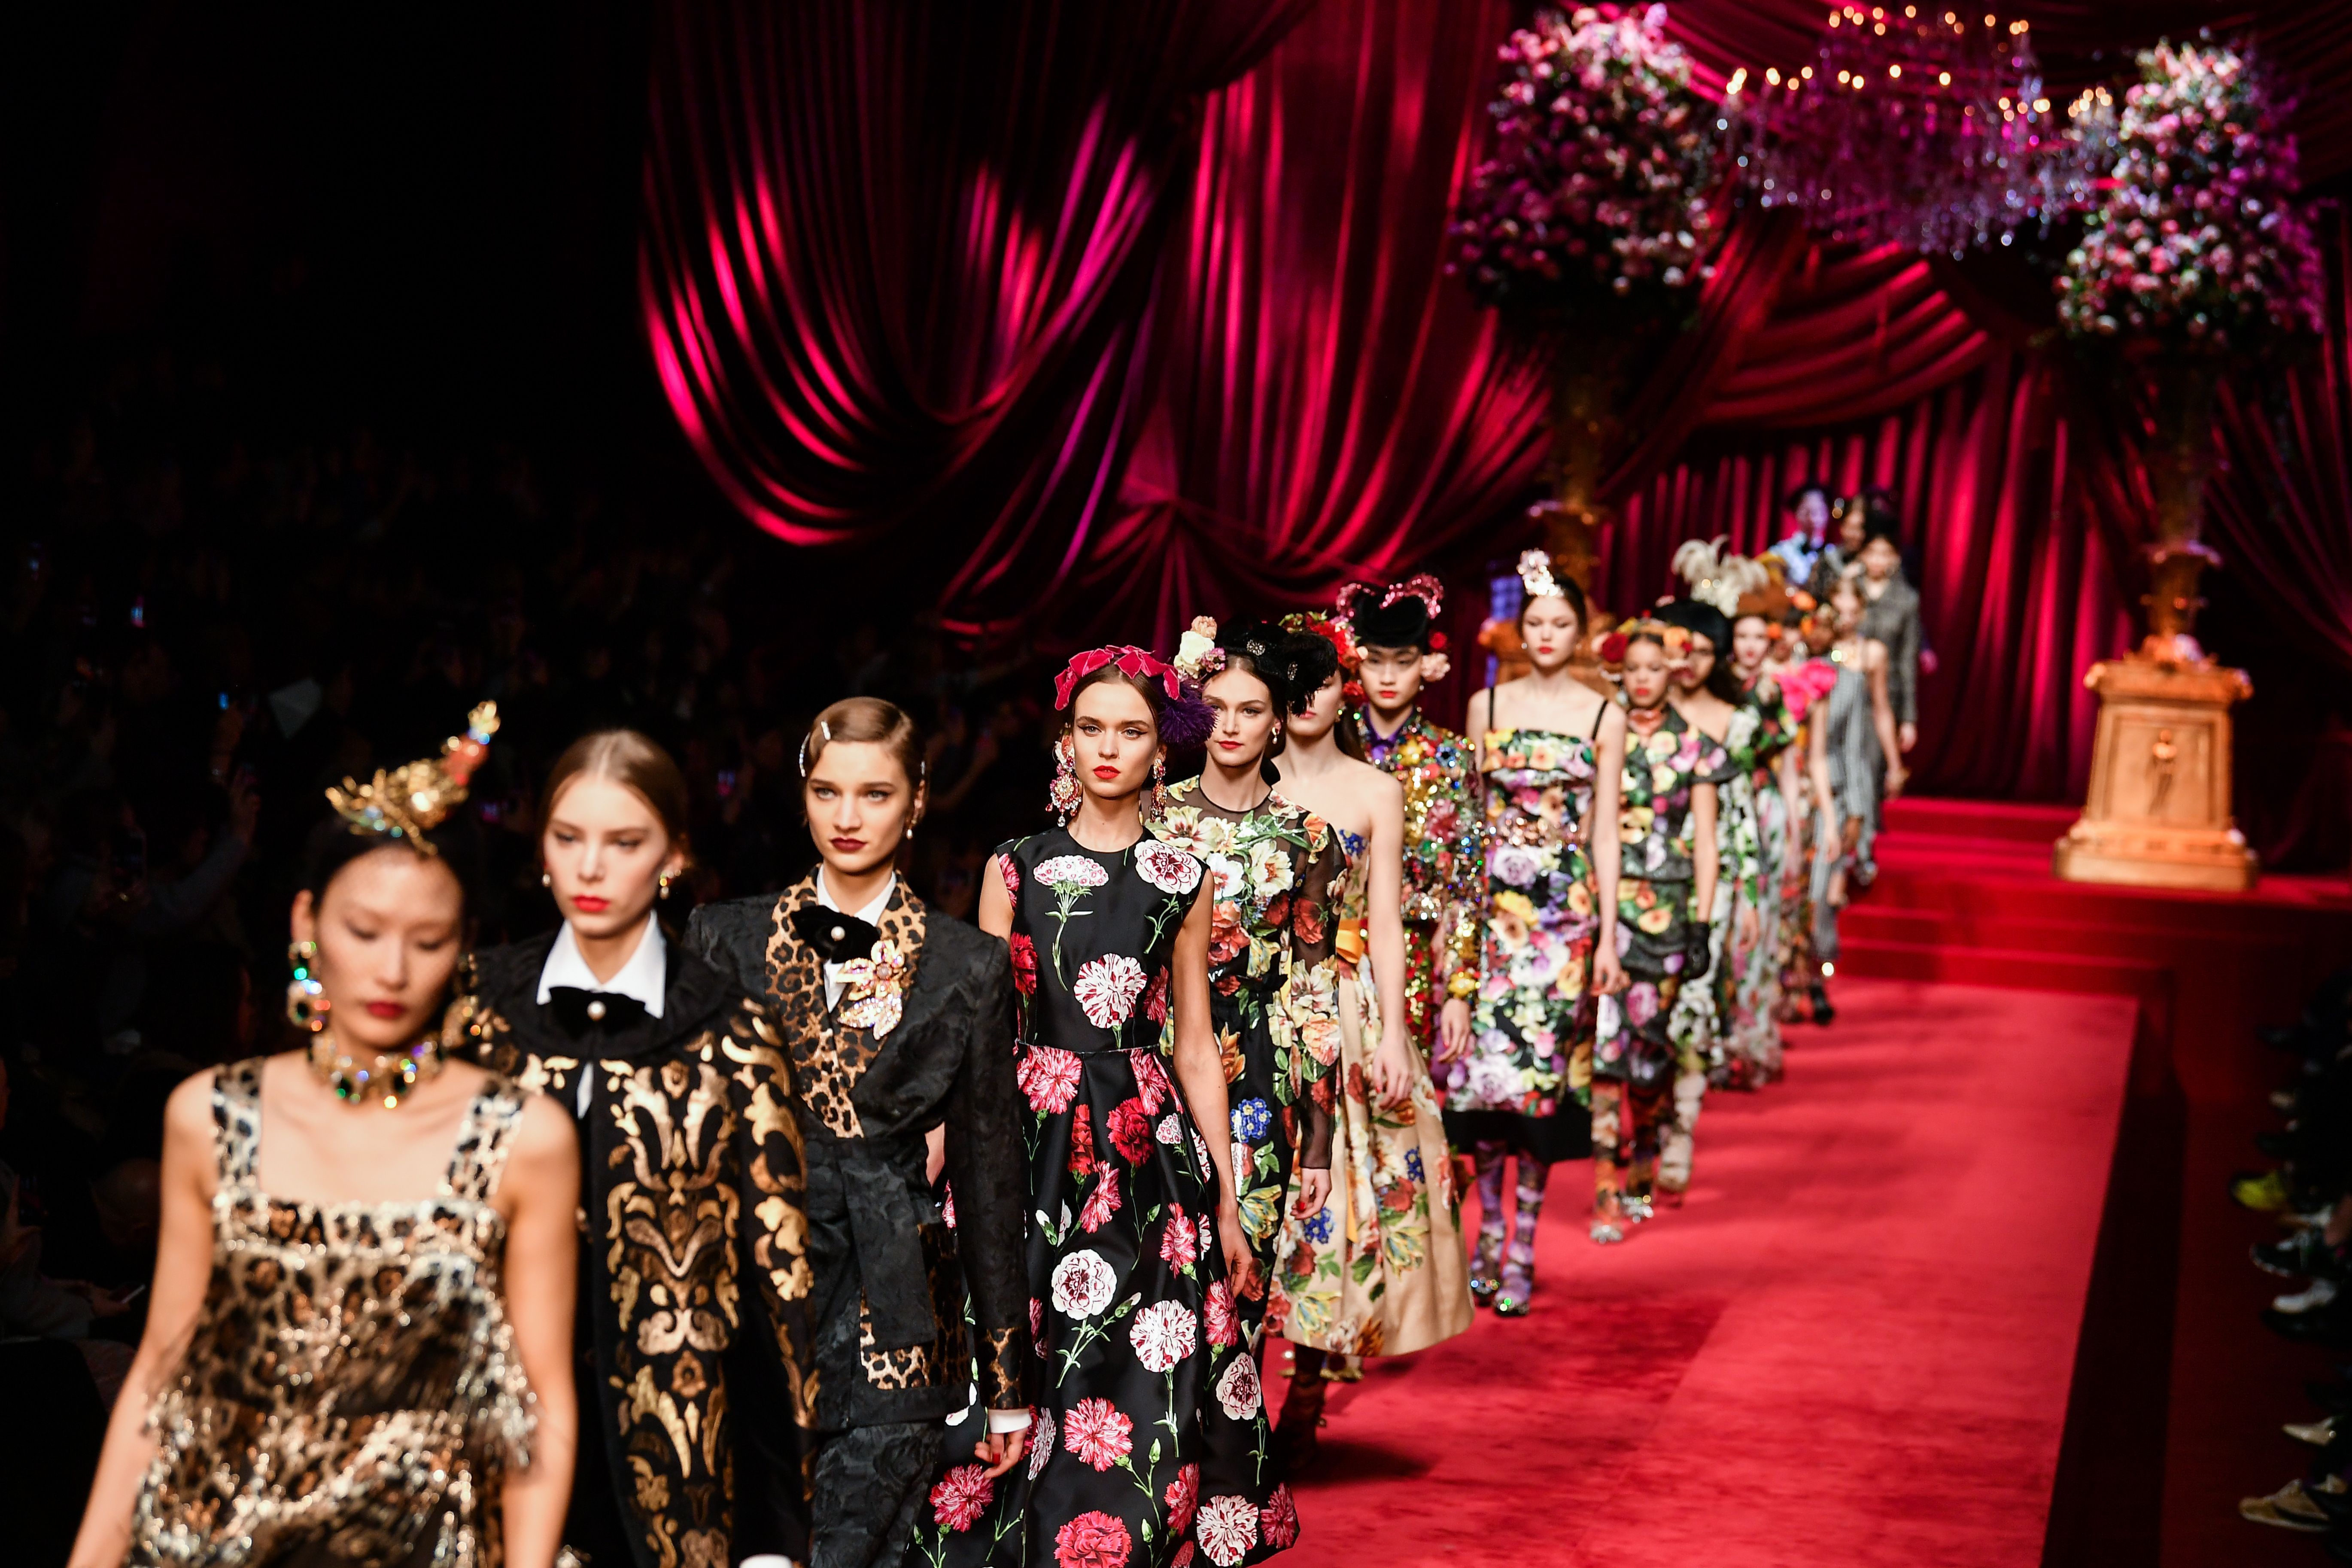 Dolce & Gabbana teams up with university to support coronavirus research